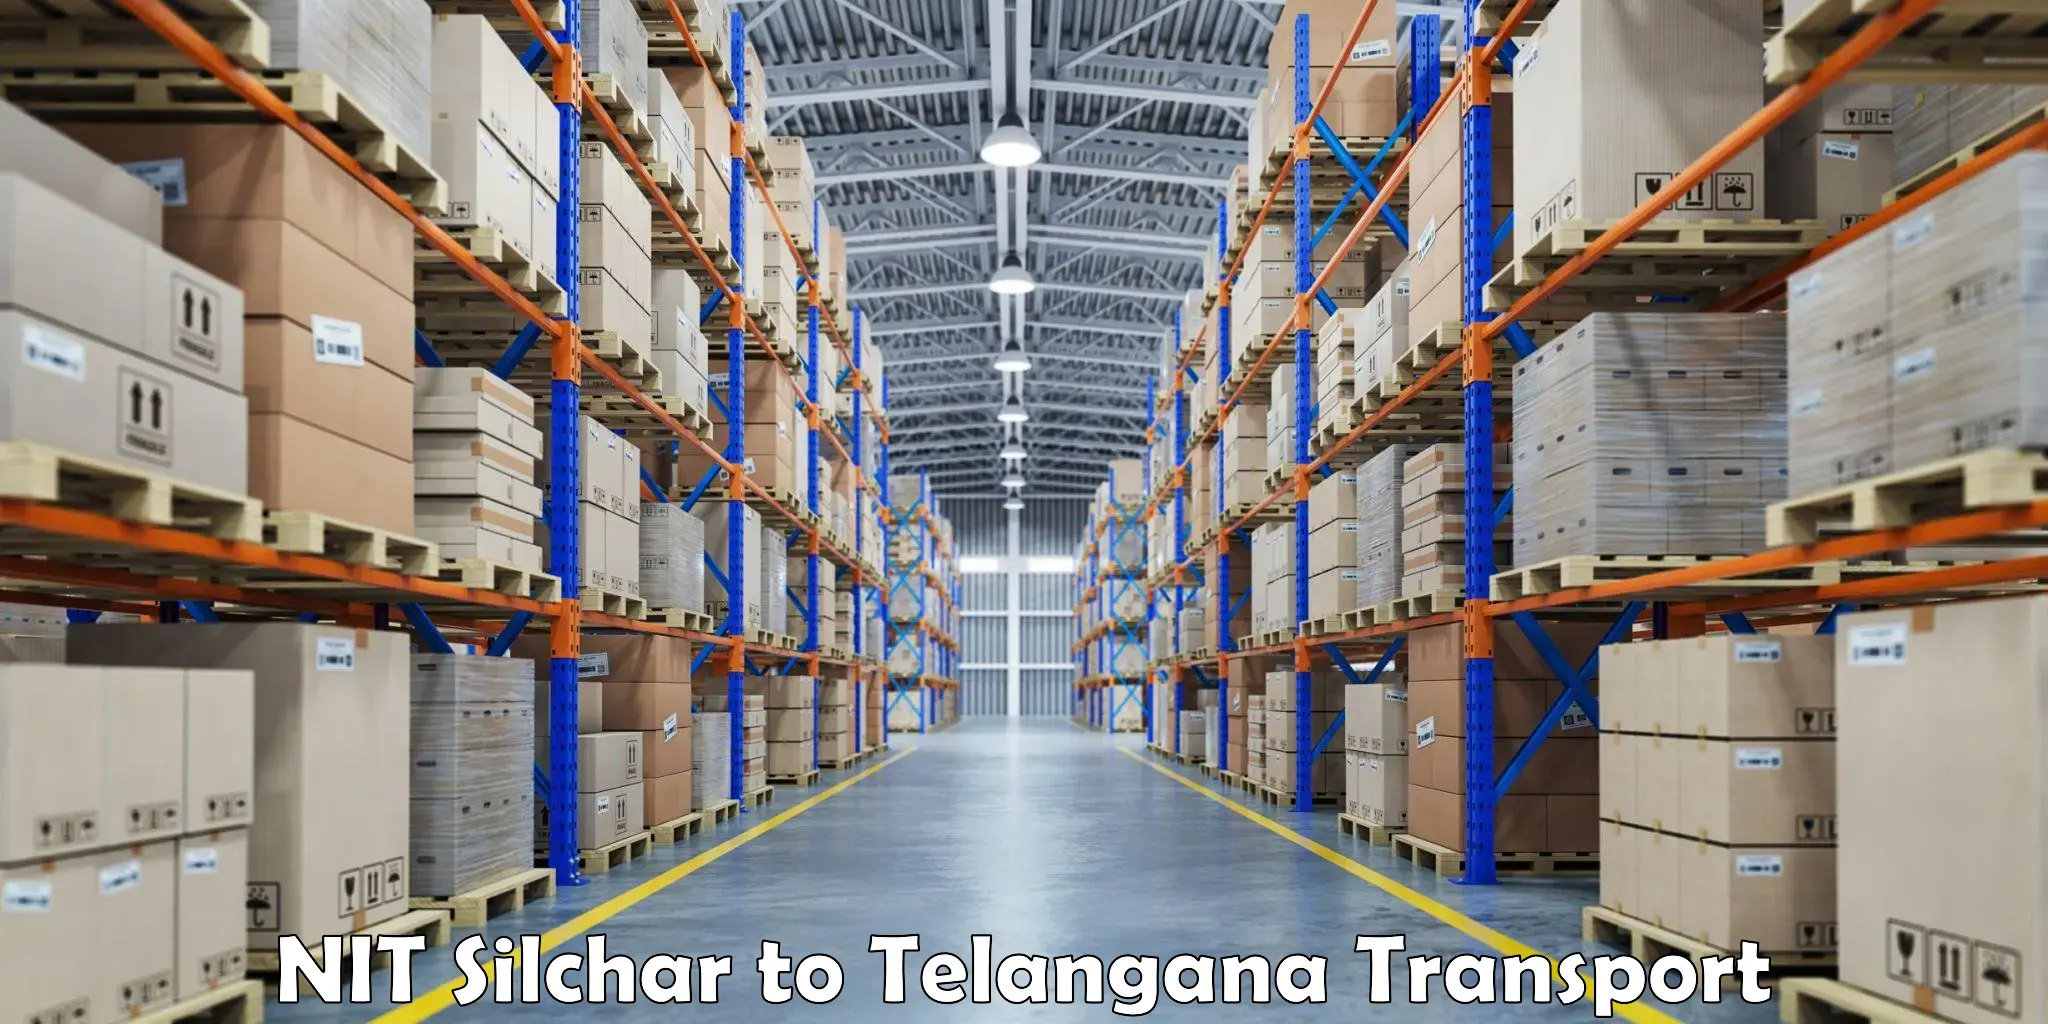 Online transport service NIT Silchar to Trimulgherry